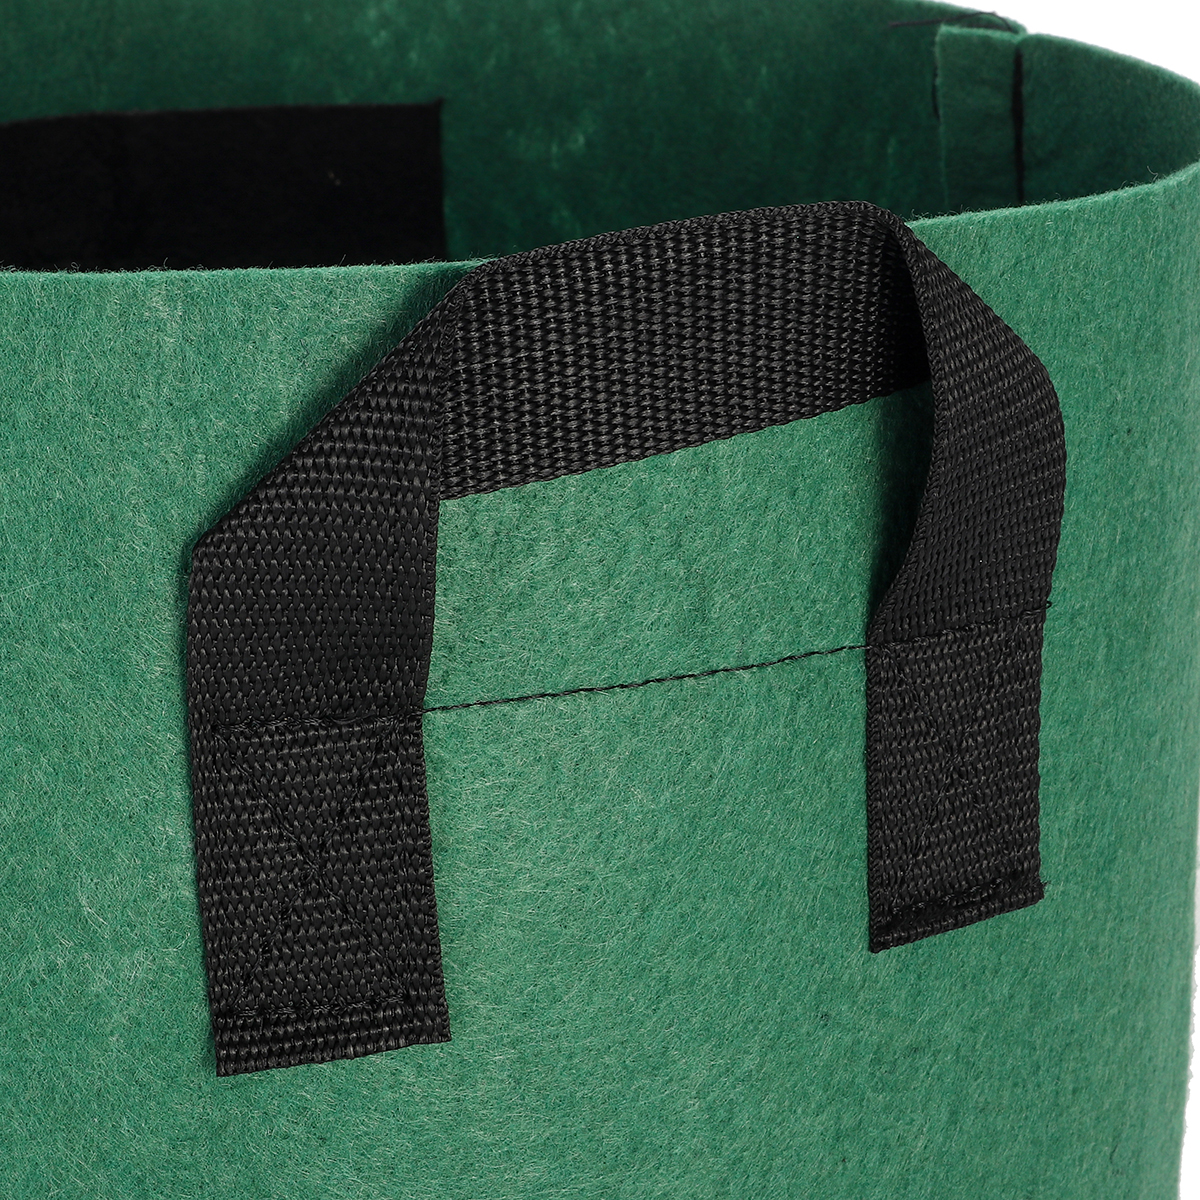 Find 1/2/3/5/7/10Gallon Felt Non Woven Pots Plant Grow Bag Planting Pouch Container Nursery Seedling Planting Breathable Barrel for Sale on Gipsybee.com with cryptocurrencies